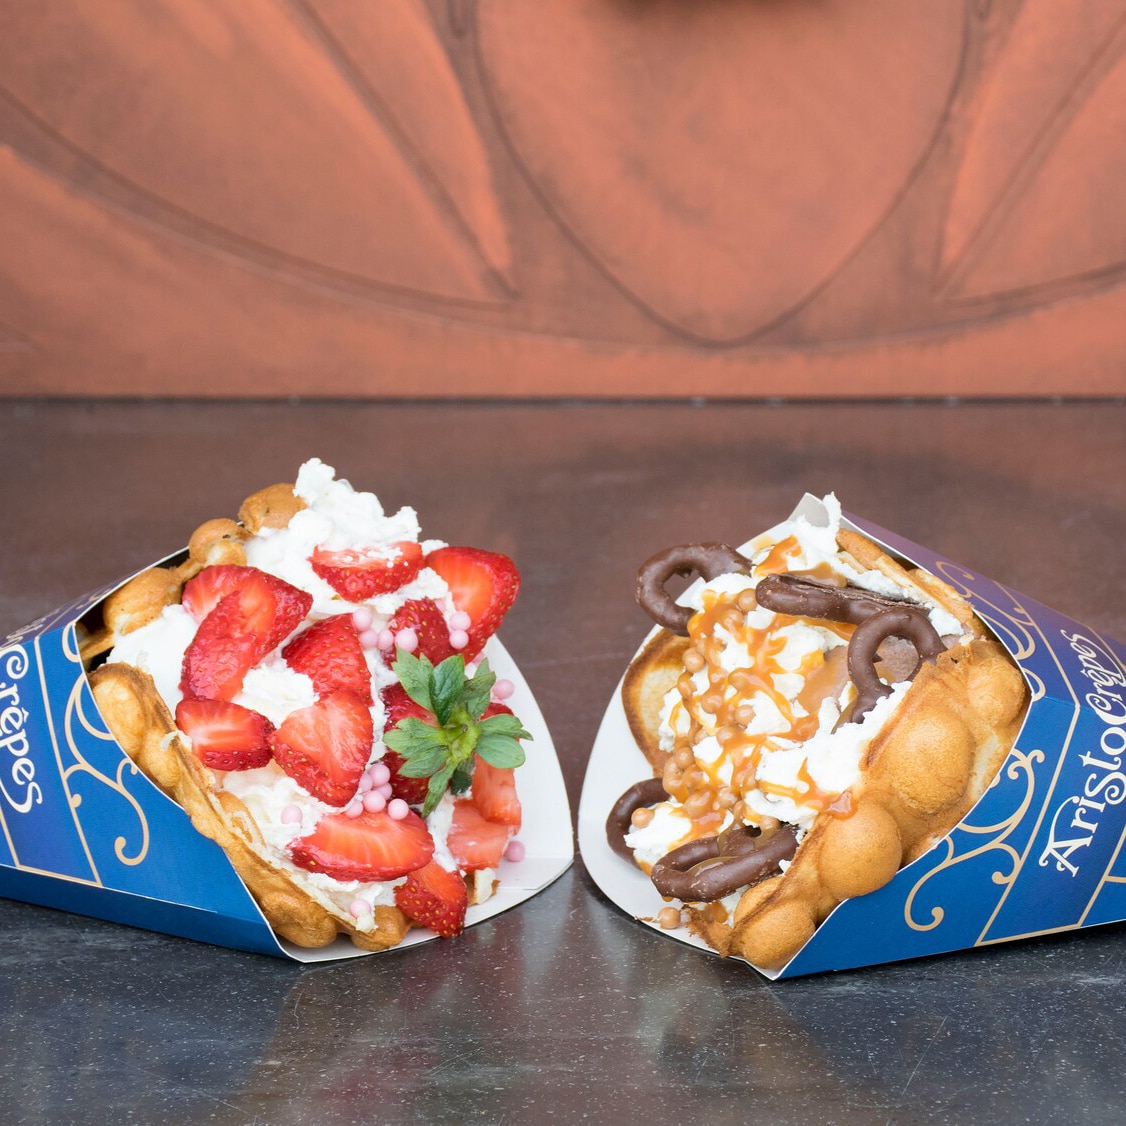 Two bubble waffles in Aristocrepes wrappers laying side by side, one is filled with strawberries and whipped cream, the other with chocolate ice cream, chocolate covered pretzels and whipped cream swirled with caramel